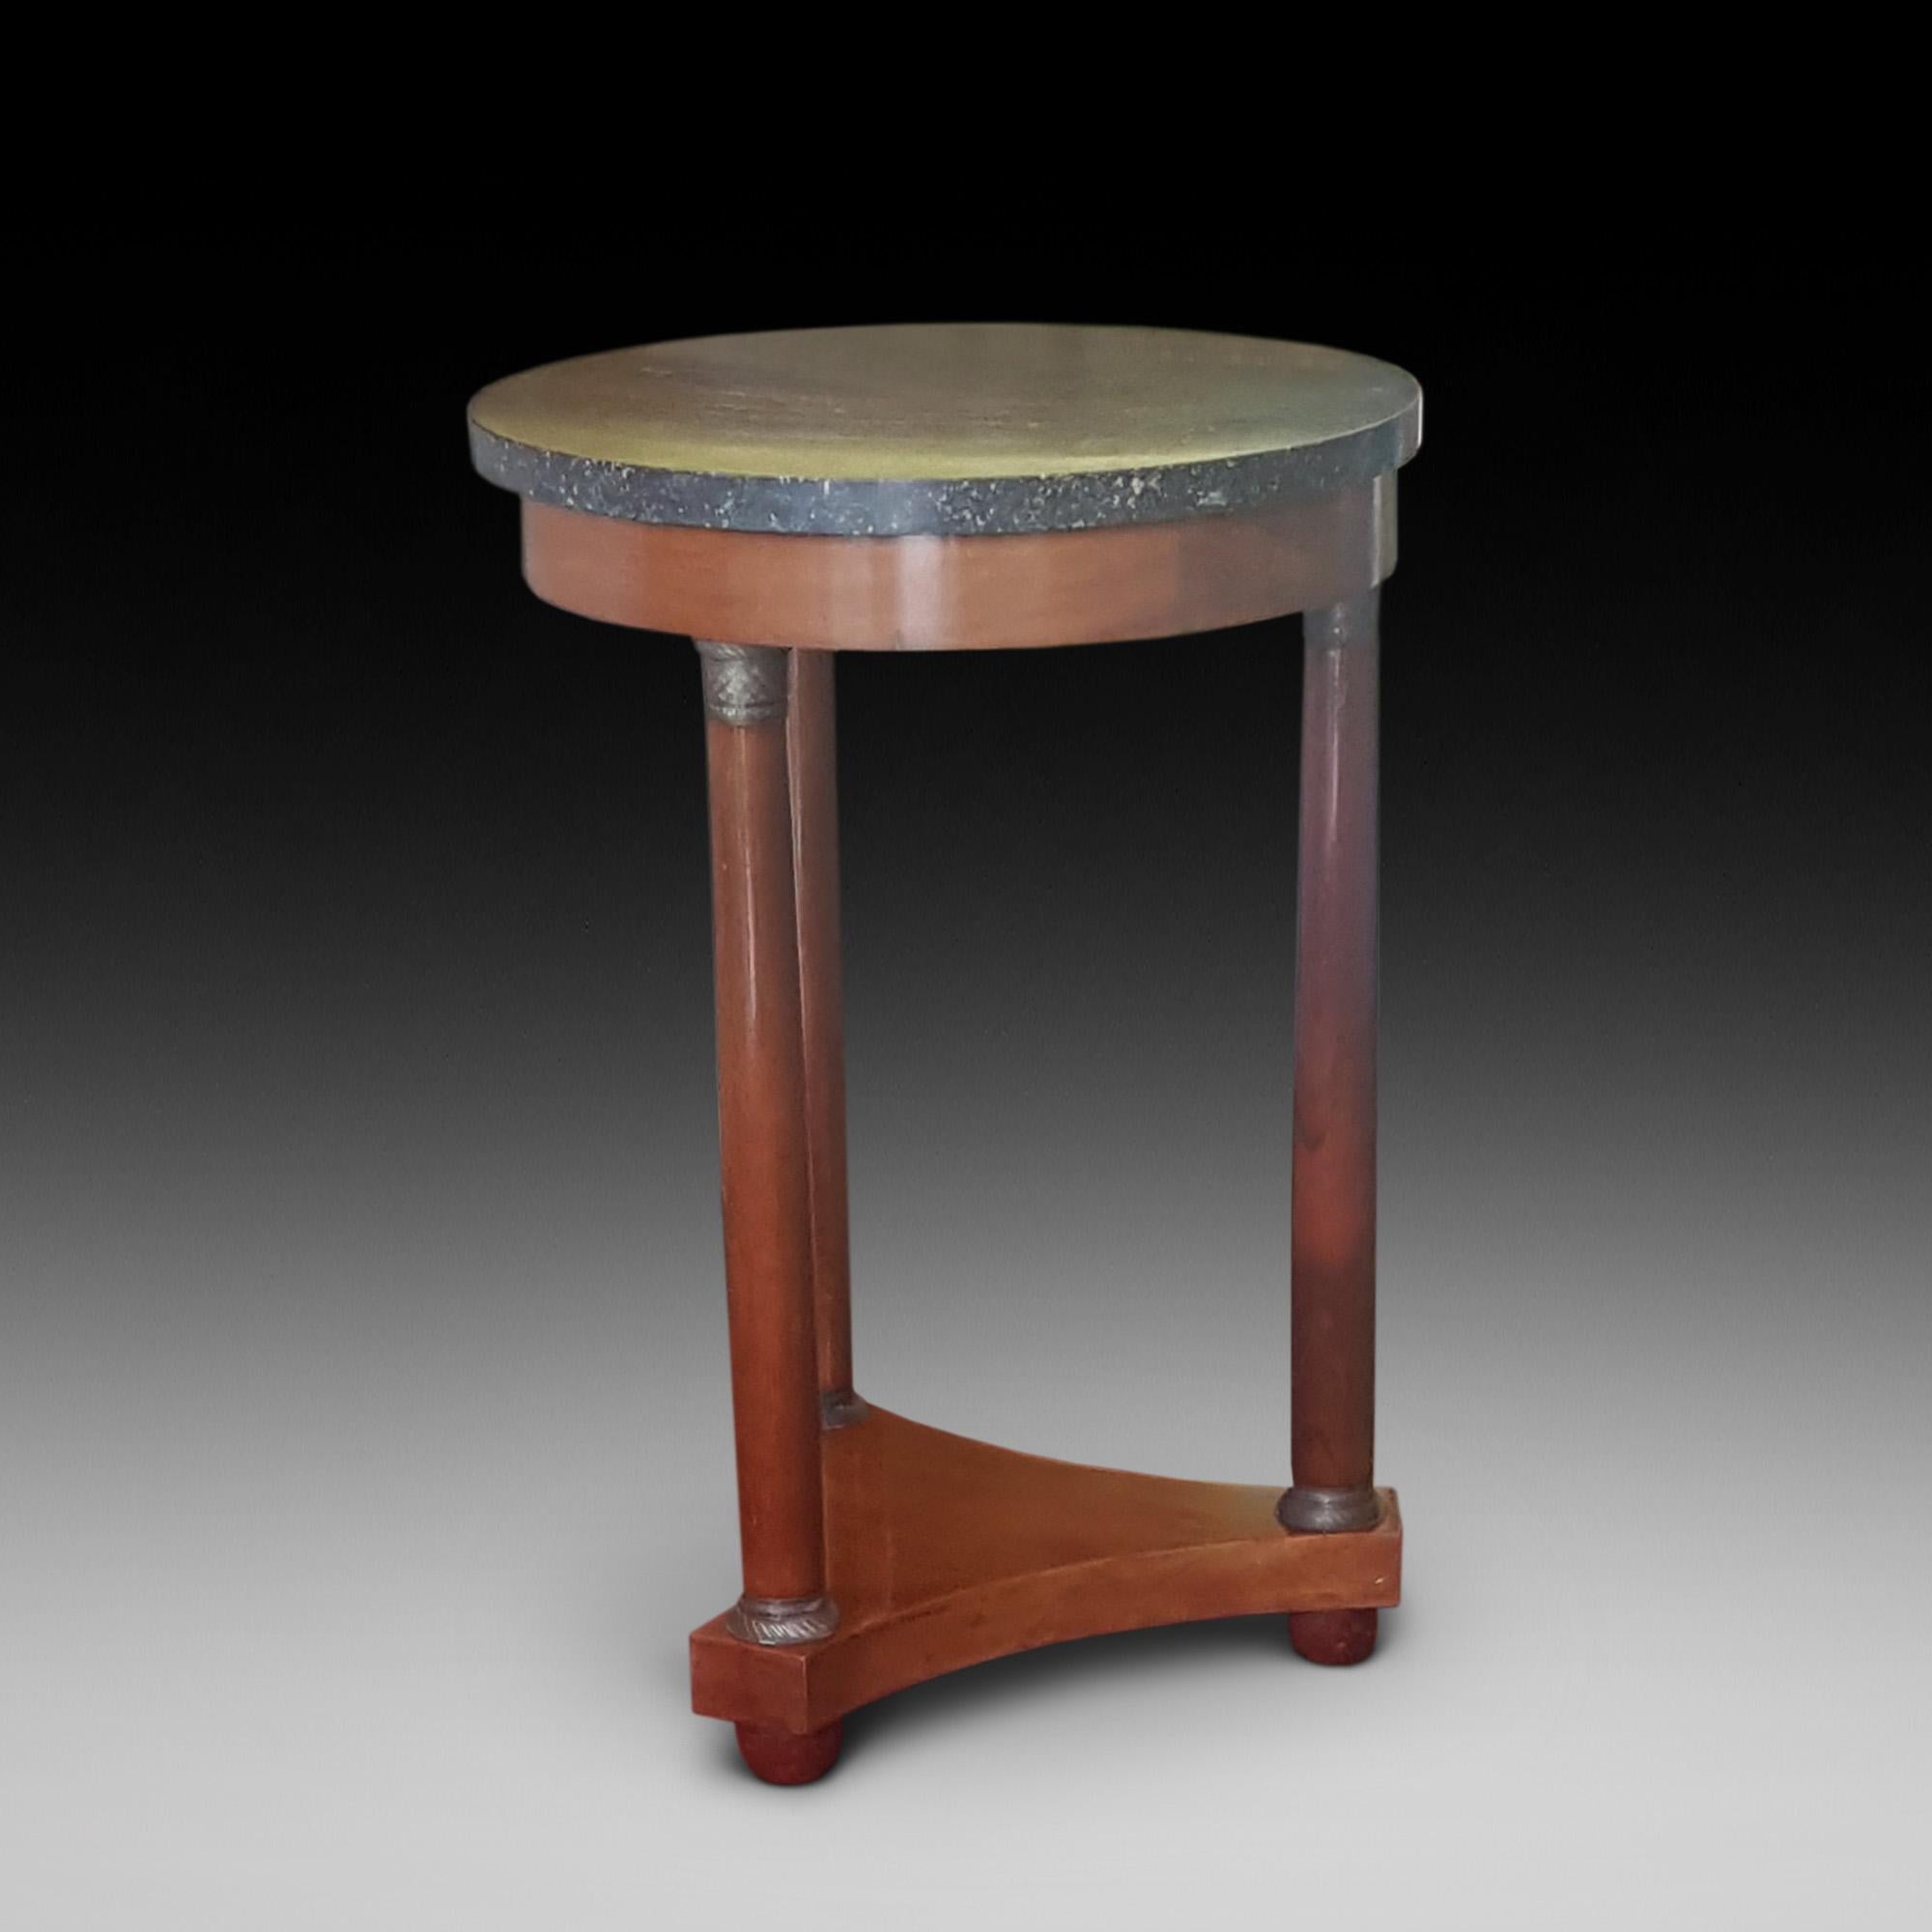 French mahogany Empire period lamp table with marble top on three brass capped pillars and triform, measures: Base 15.5